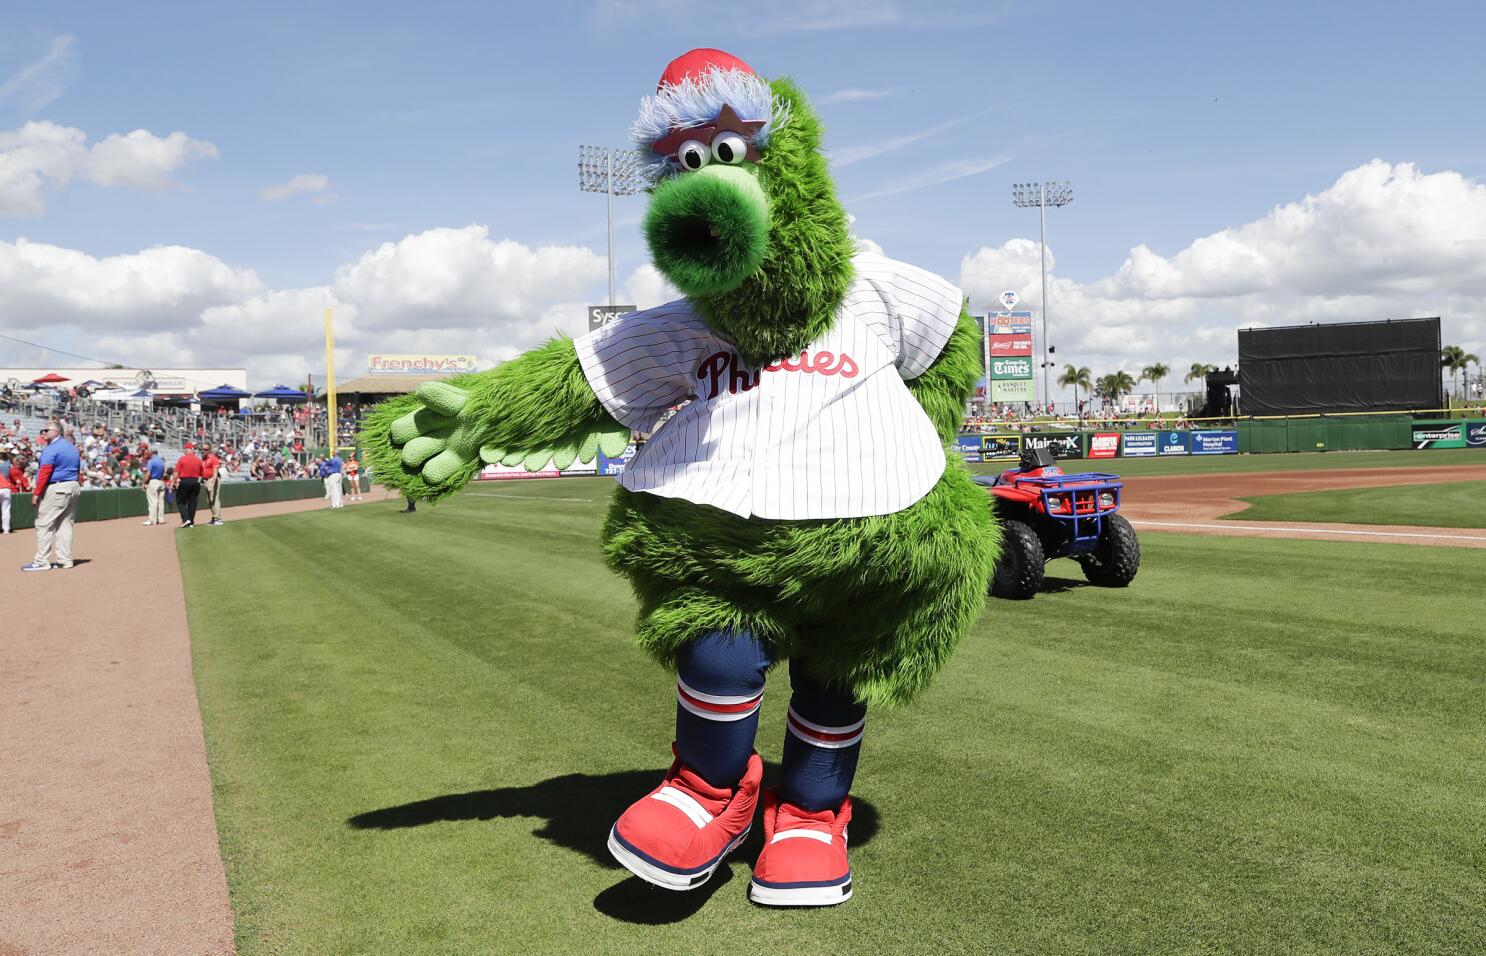 Phillie Phanatic's new look has a supporter in Flyers mascot Gritty - 6abc  Philadelphia